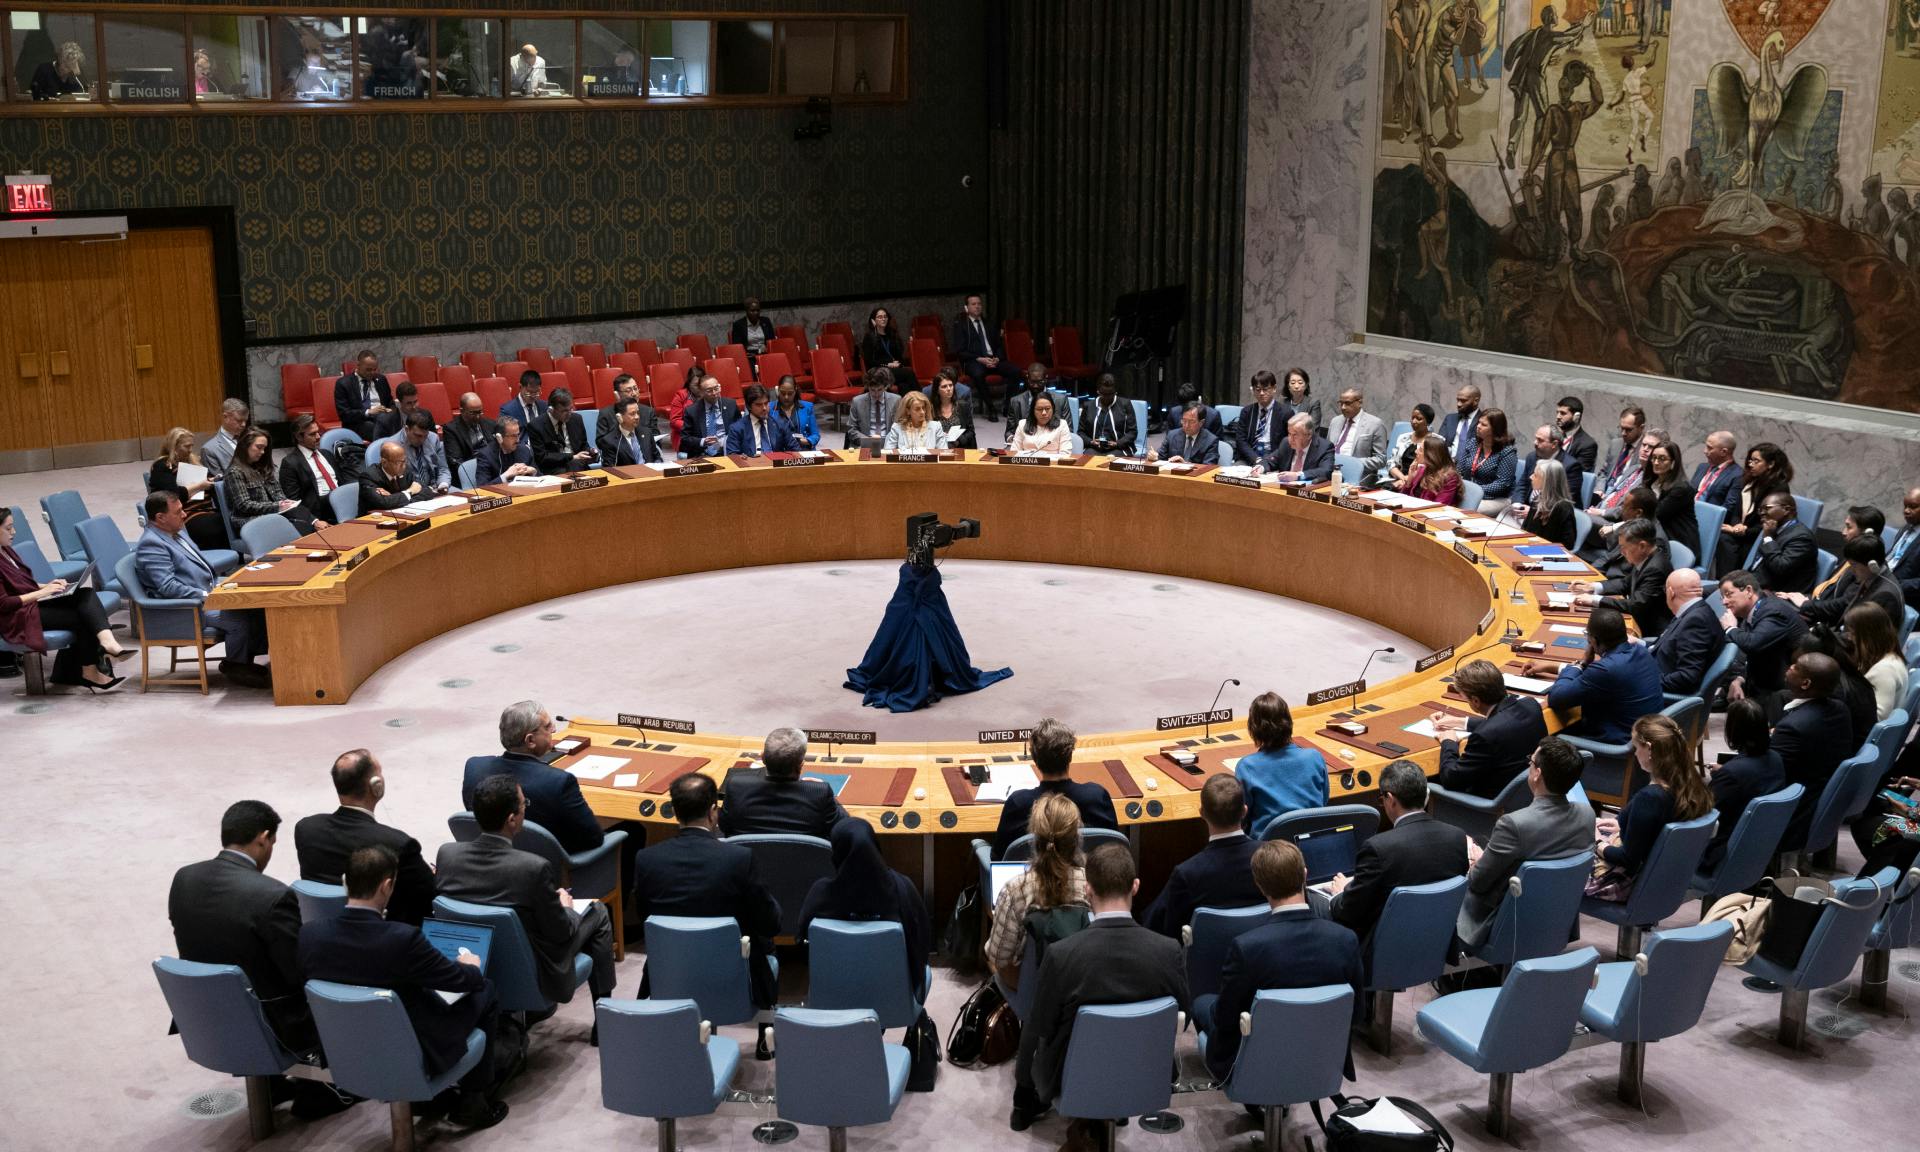  United Nations Security Council gathered during meeting following Iran's recent attack on Israel